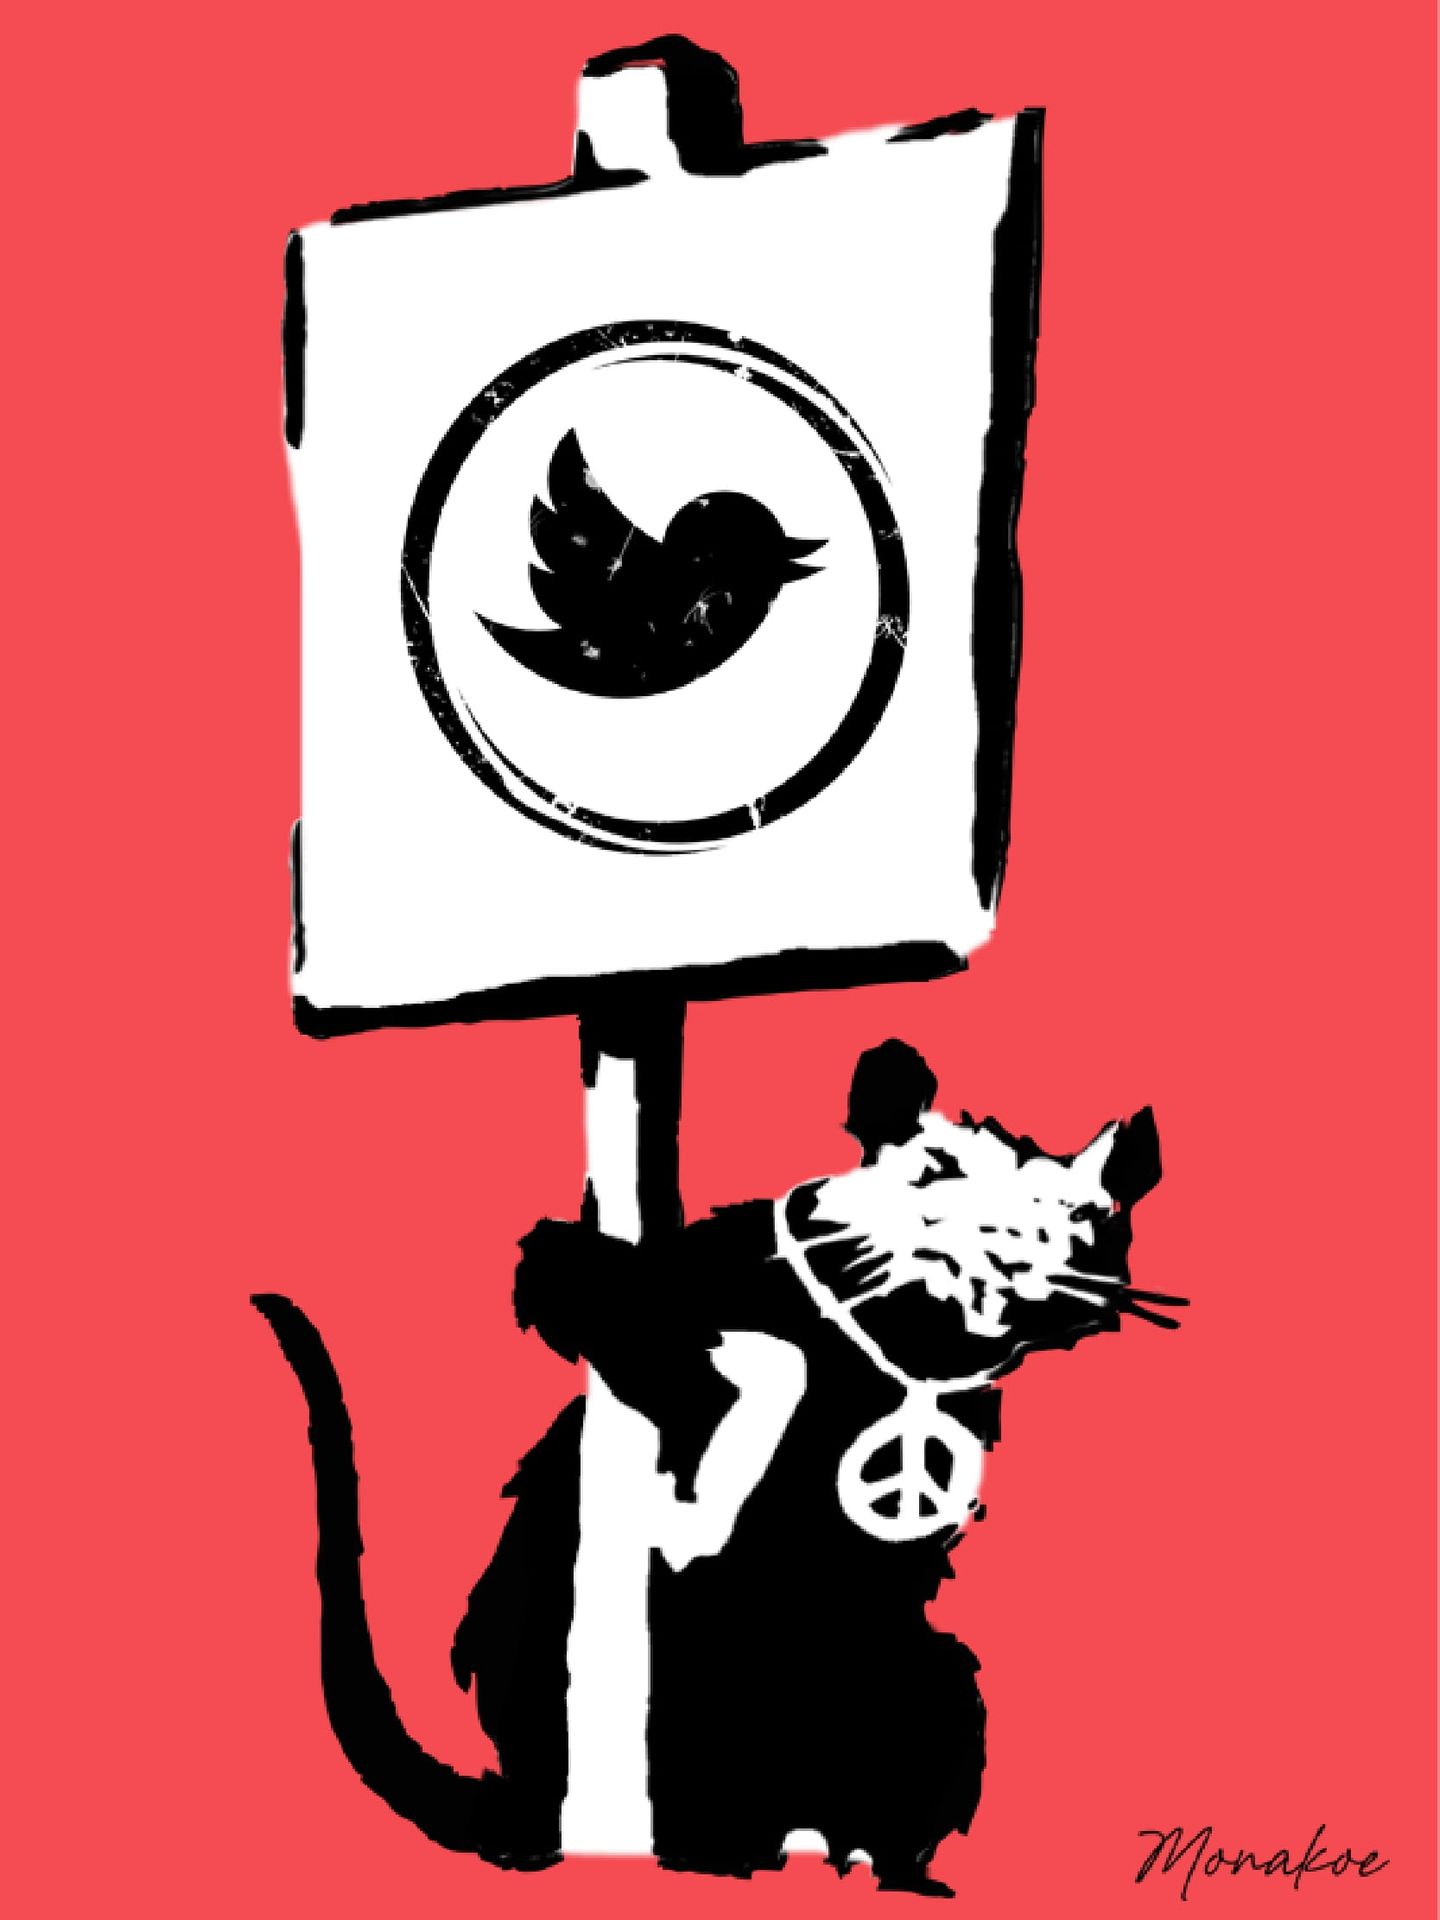 Null Twitter Rat, inspired by Banksy's character, Monakoe, Acrylic glass finish,&hellip;